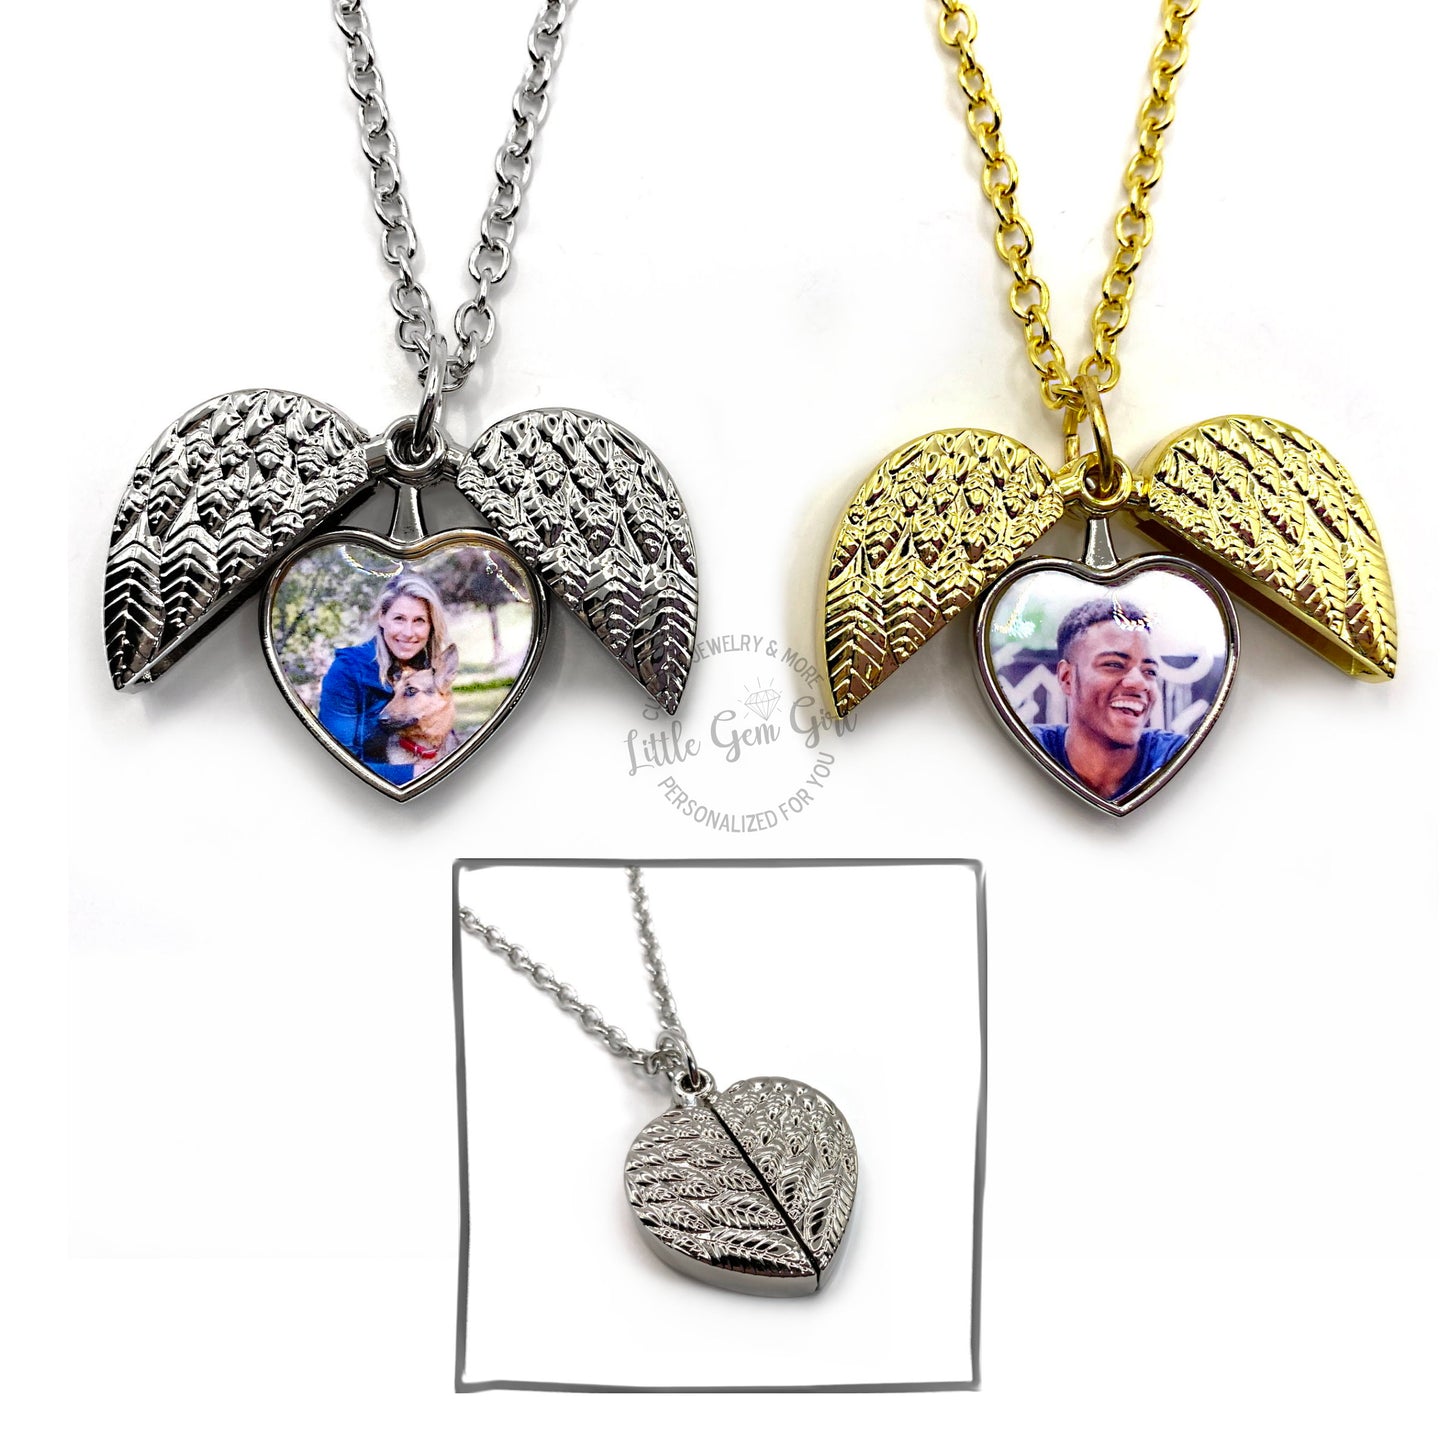 Angel Wing Custom Photo Heart Locket in Silver or Gold - Personalized Memorial Keepsake Jewelry for Loss of Loved One